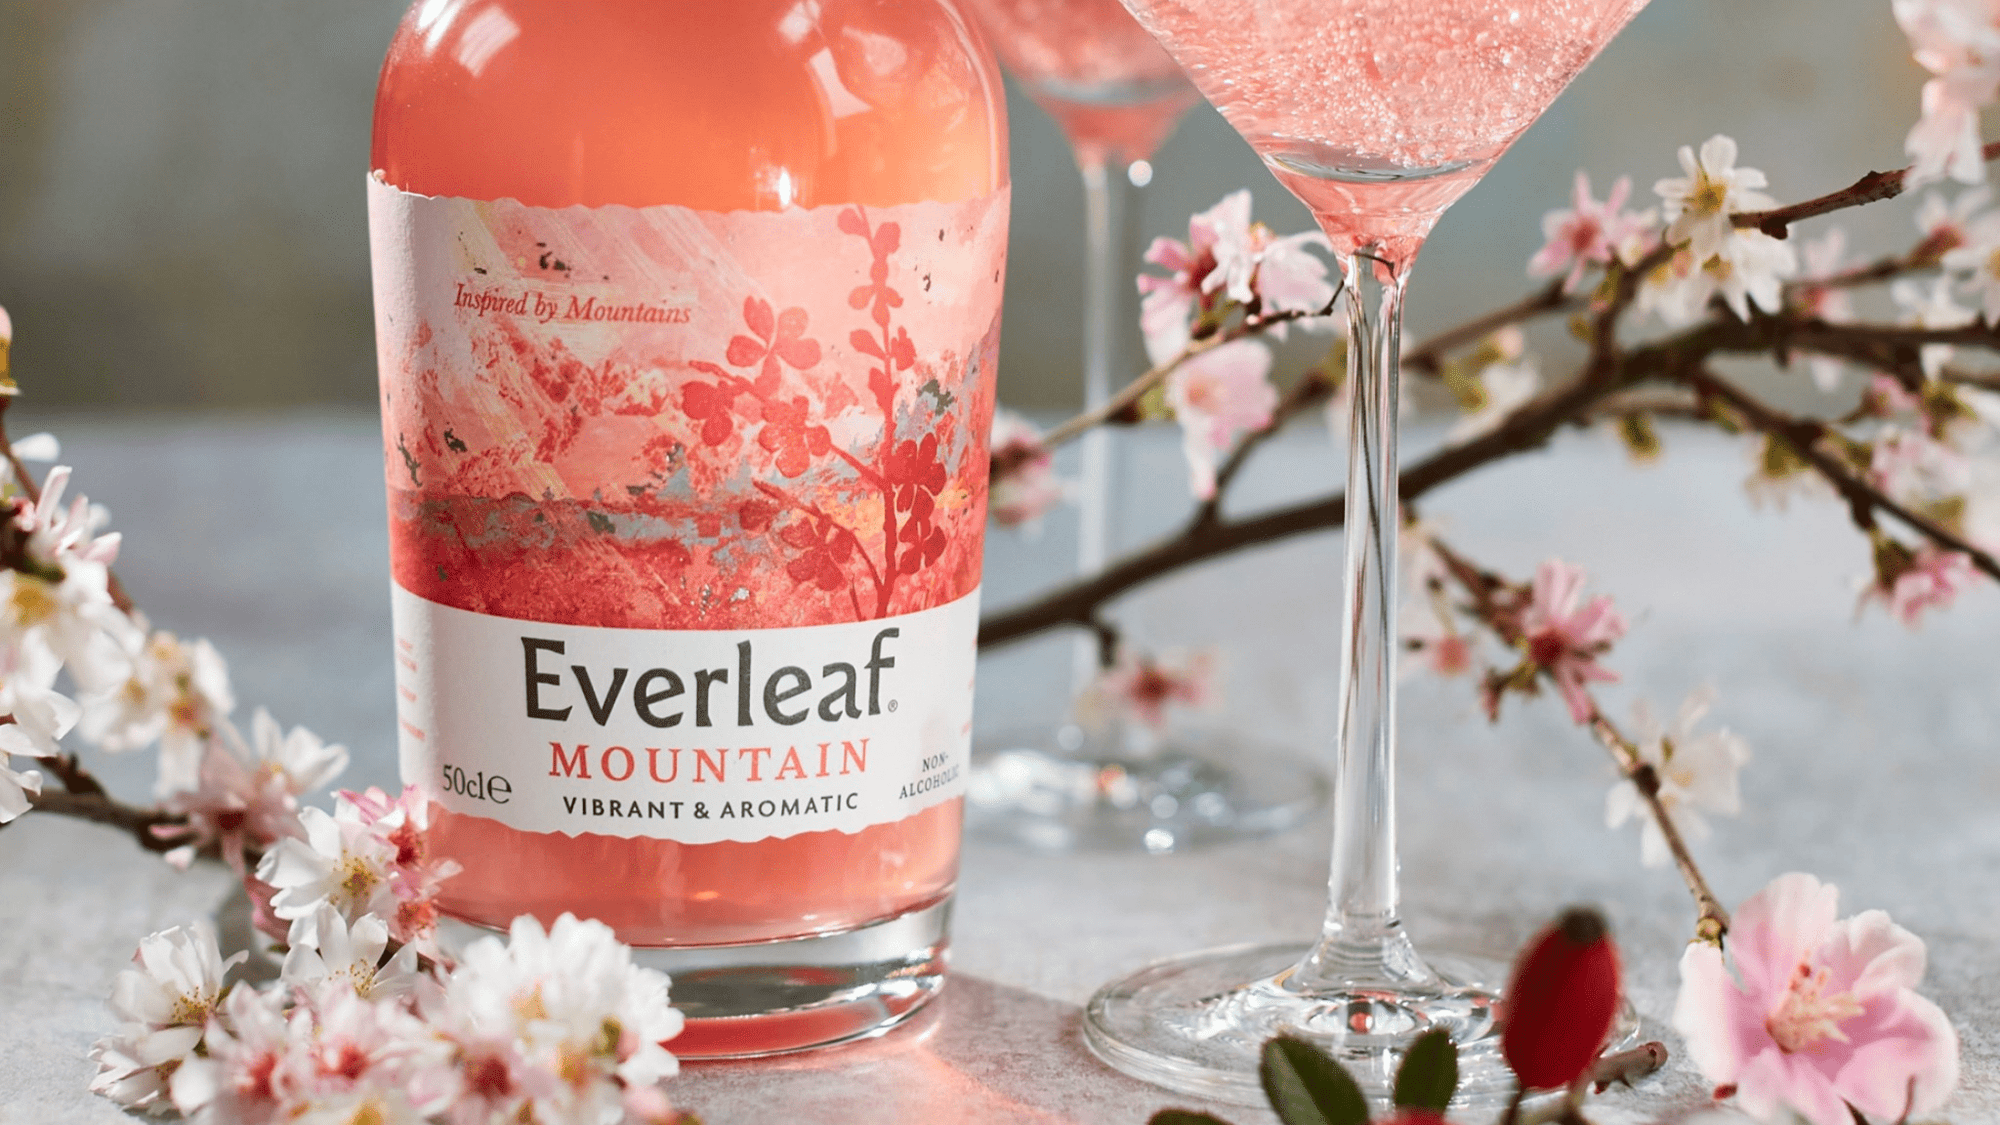 Q&A with Paul Mathew: Enjoying Cherry Blossoms With The Founder of Everleaf - Boisson